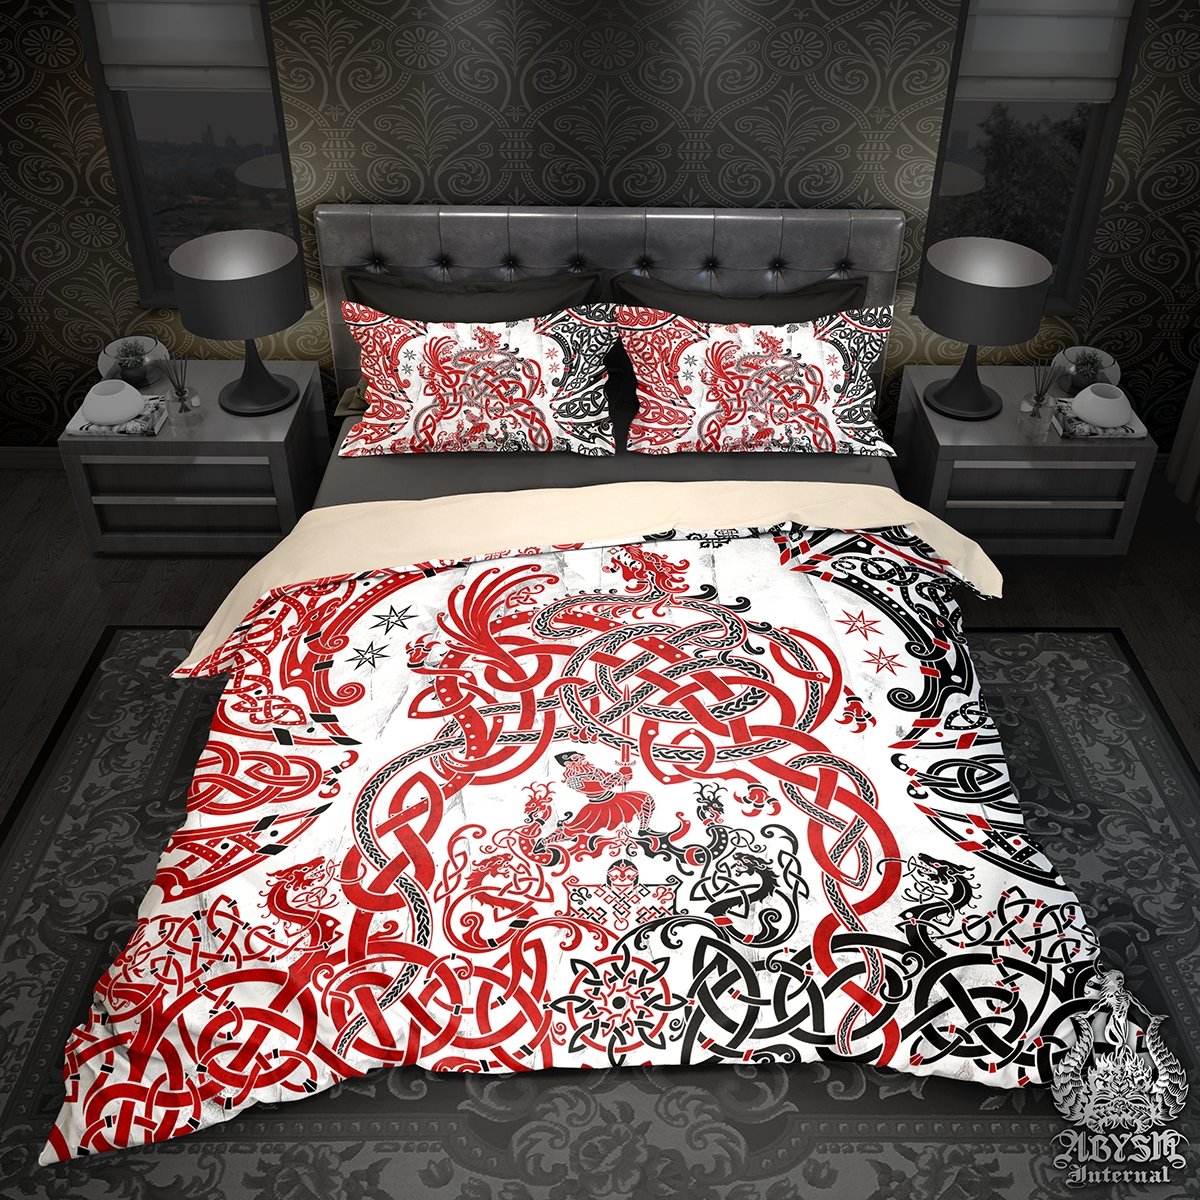 Viking Bedding Set, Comforter and Duvet, Norse Bed Cover and Bedroom Decor, Nordic Art, Sigurd kills Dragon Fafnir, King, Queen and Twin Size - Bloody White Goth - Abysm Internal